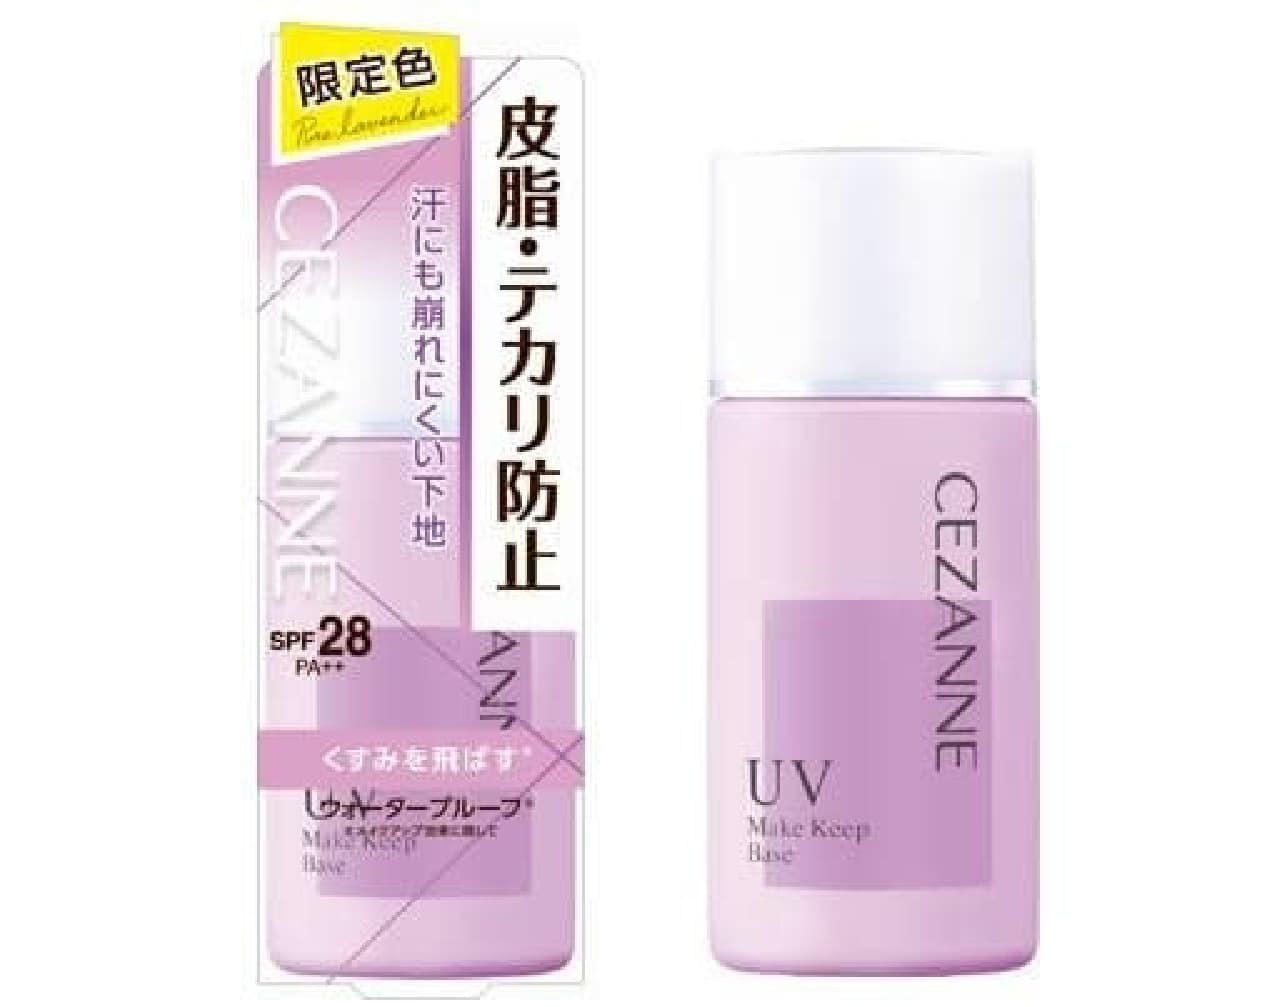 From Cezanne Cosmetics, the limited edition color “Pure Lavender” of the popular base “Cezanne Sebum and Shine Prevention Base” will be released in limited quantities in early April 2024 Image 1